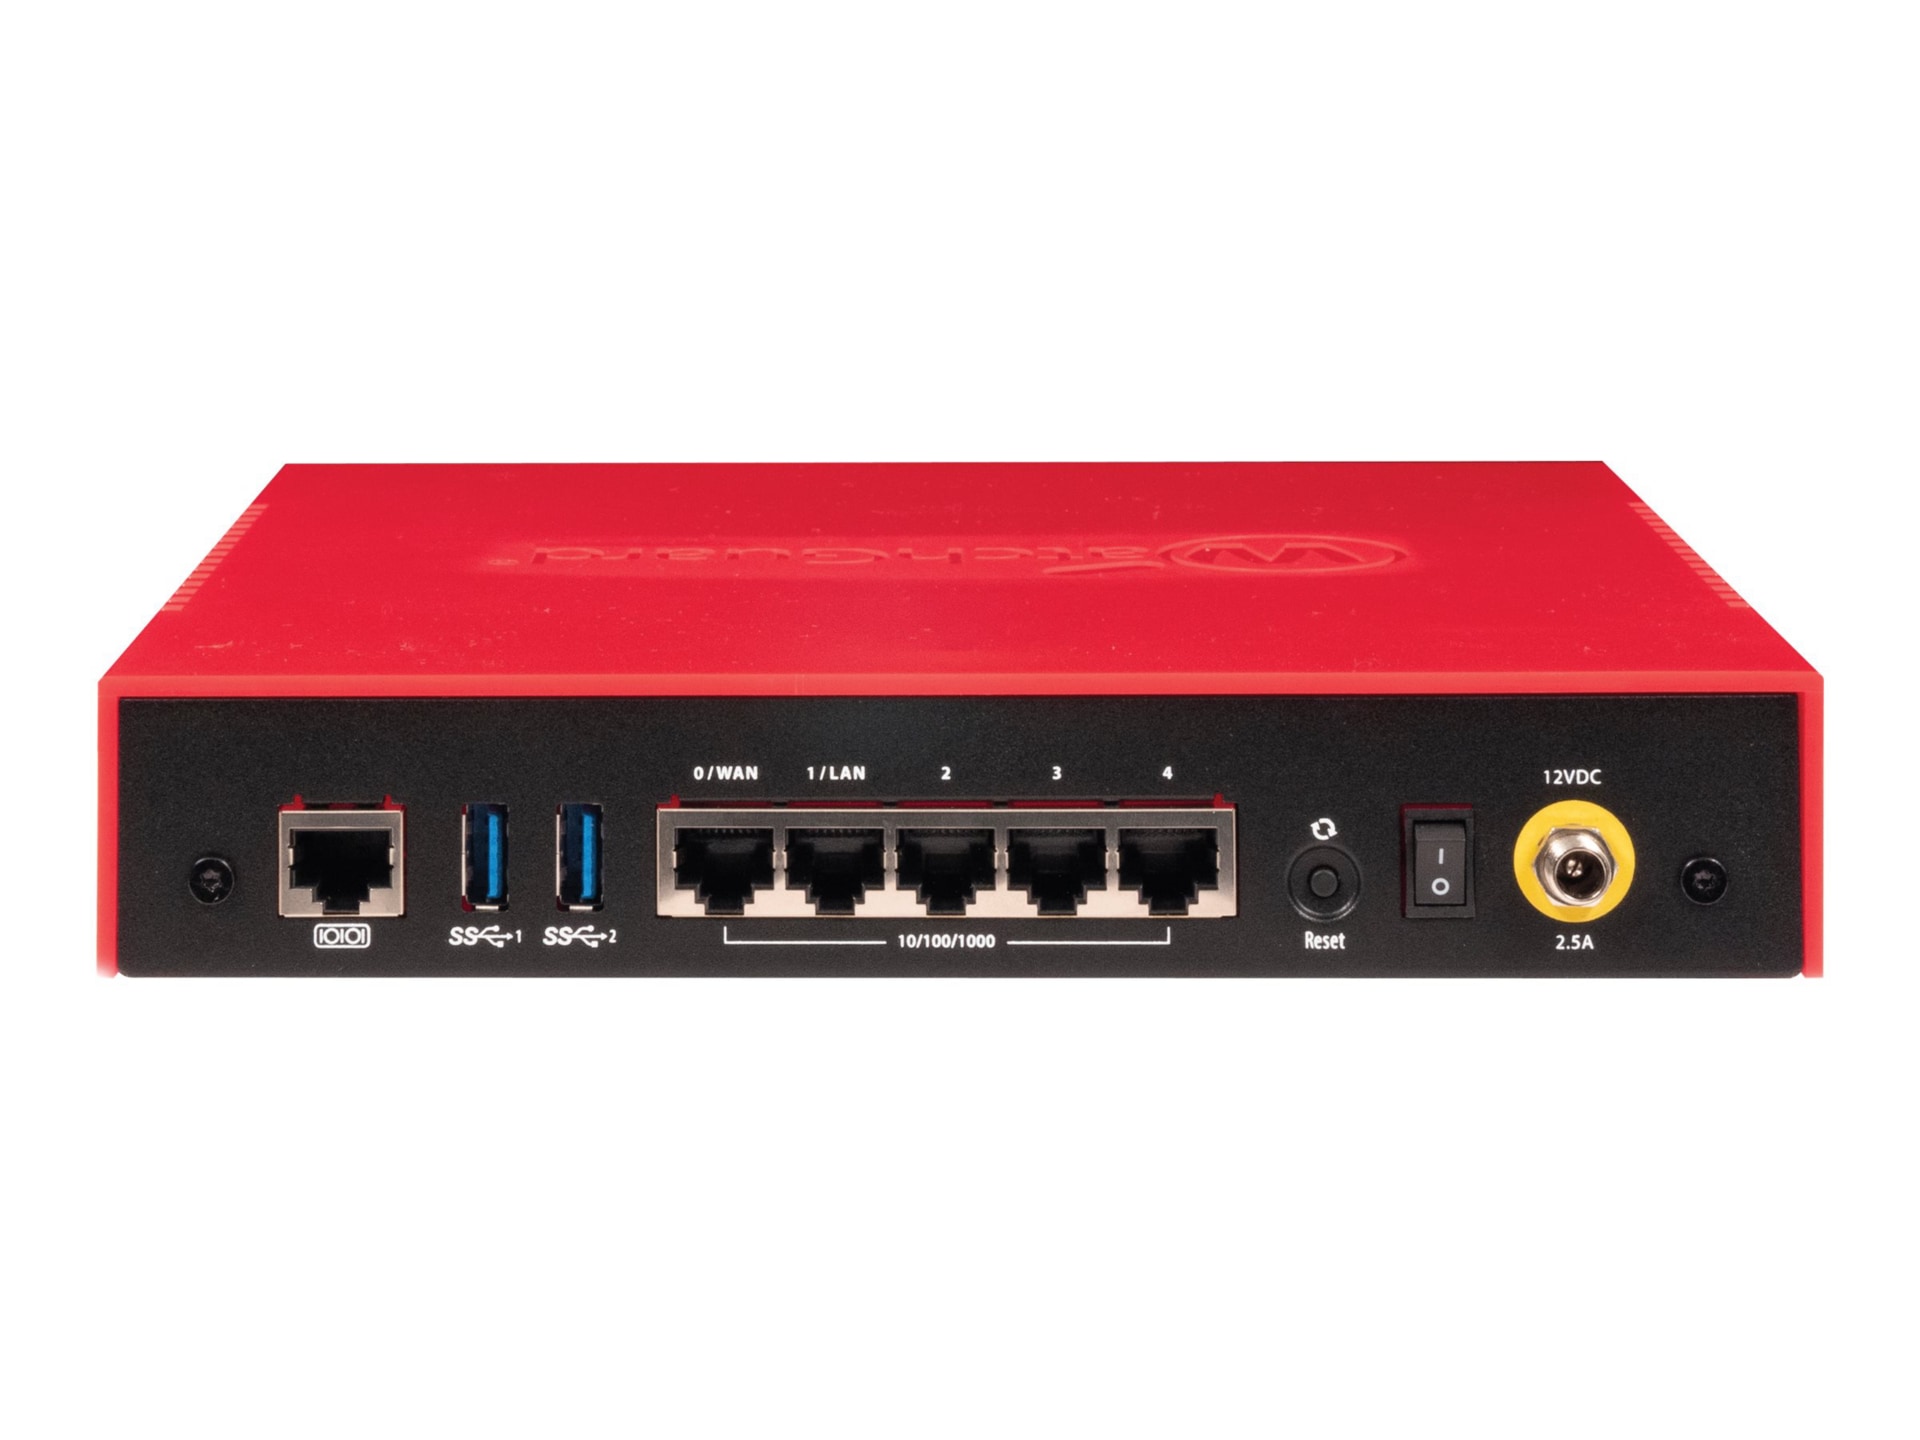 WatchGuard Firebox T20-W - security appliance - Wi-Fi 5 - WatchGuard Trade-Up Program - with 1 year Basic Security Suite